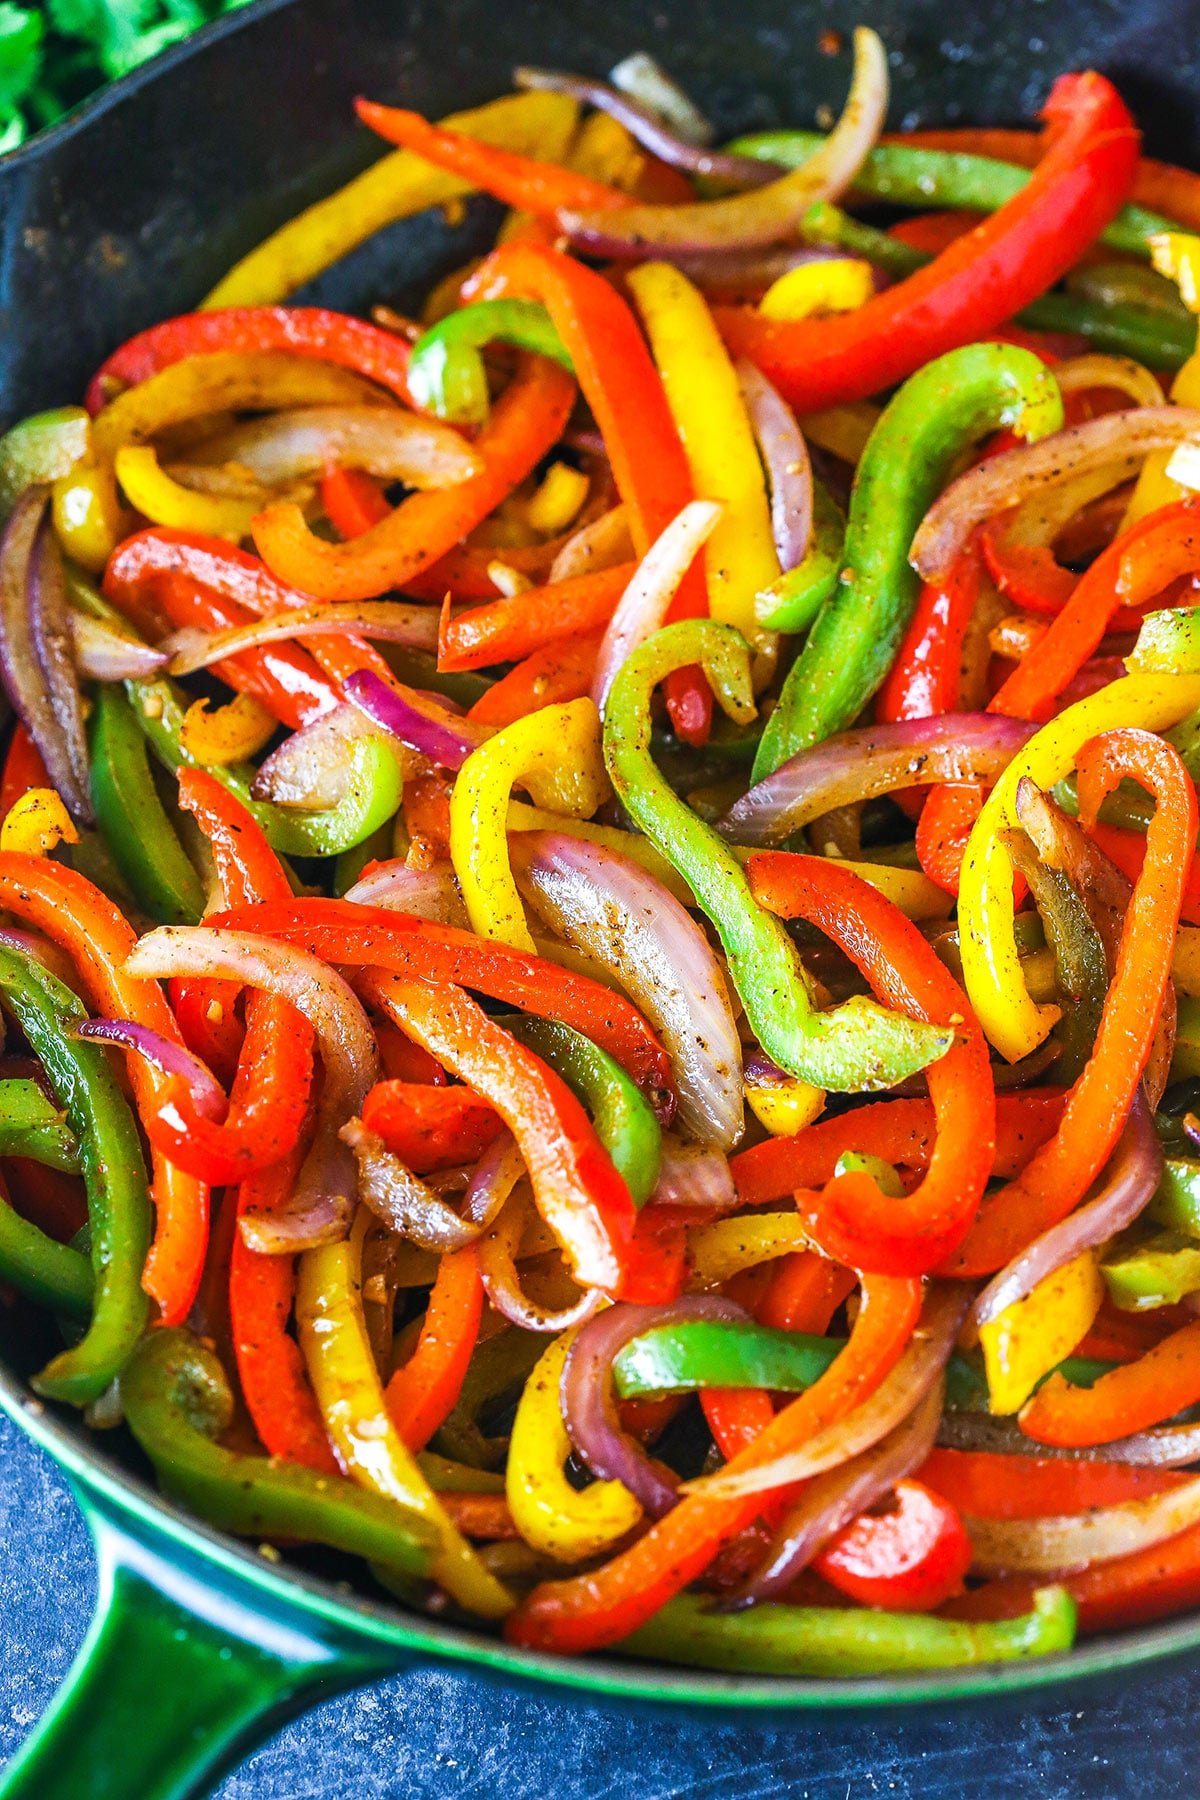 Sliced red yellow and green bell peppers and onions in a skillet